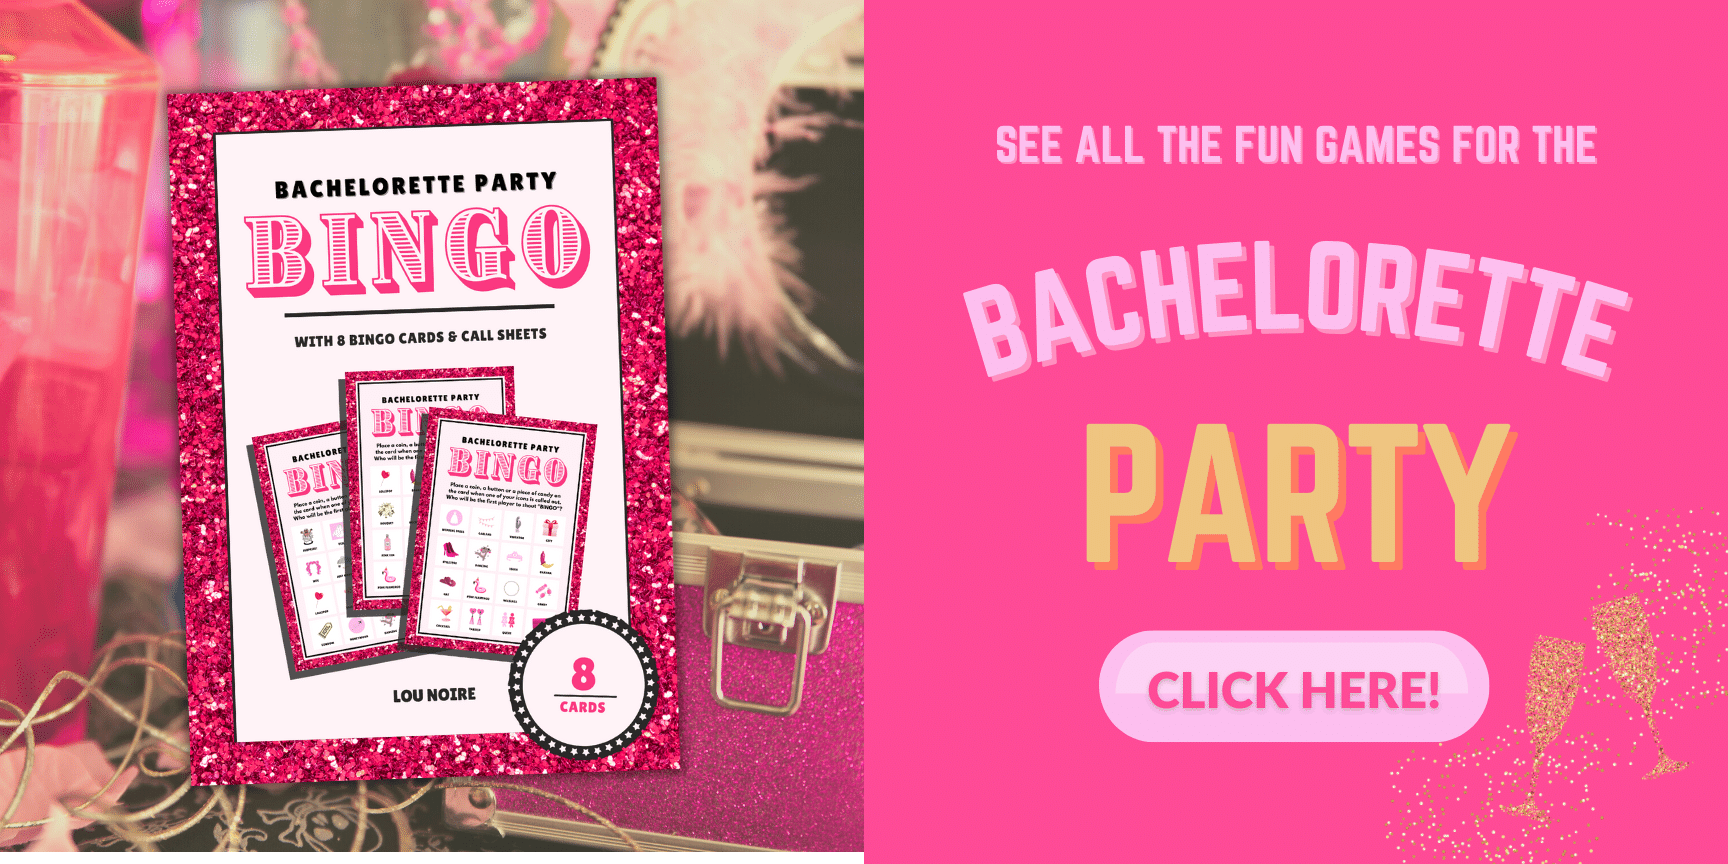 Games and party activities for the bachelorette party - Banner - Lou Noire